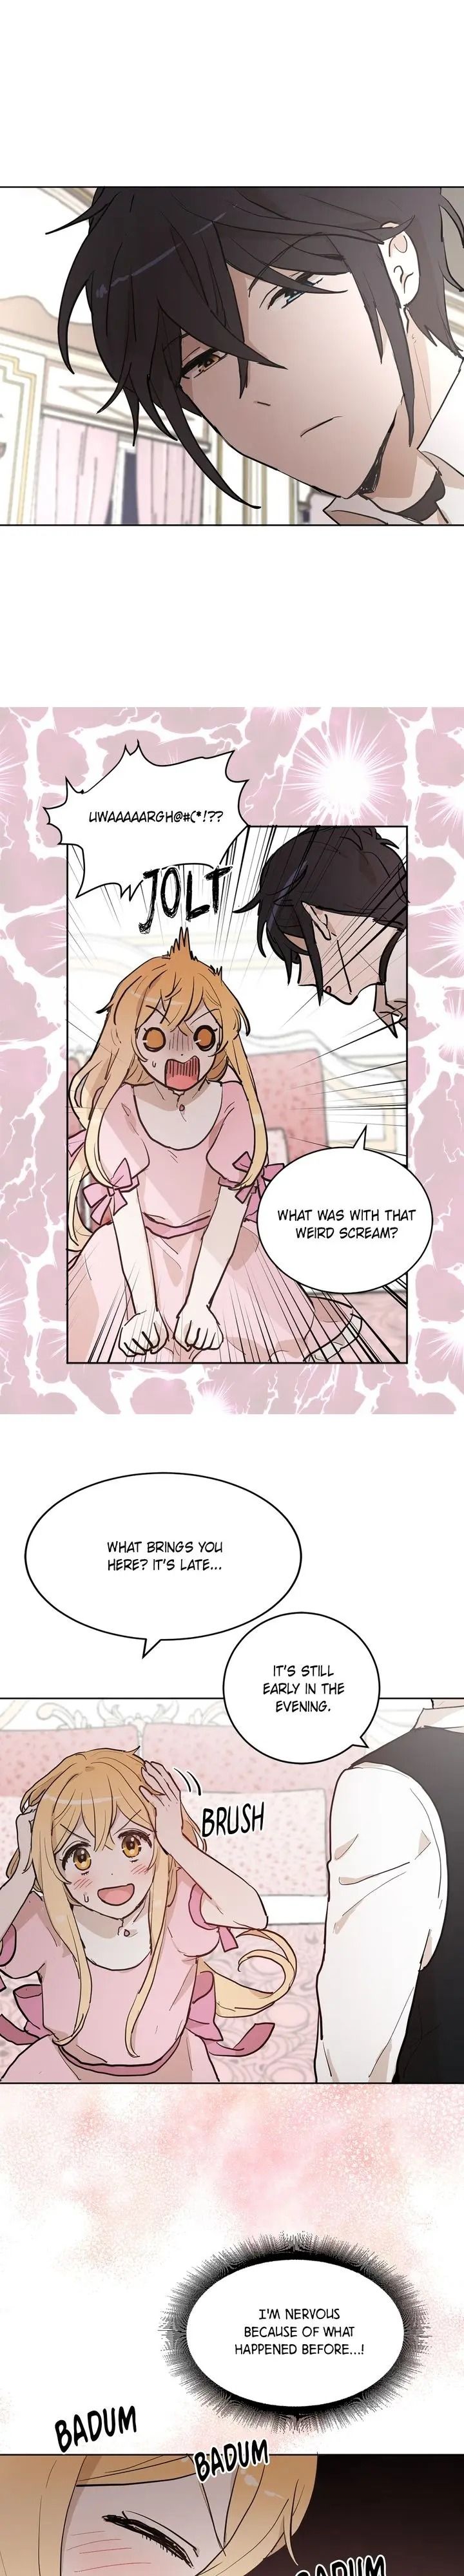 Cat's Bride Chapter 72 page 5